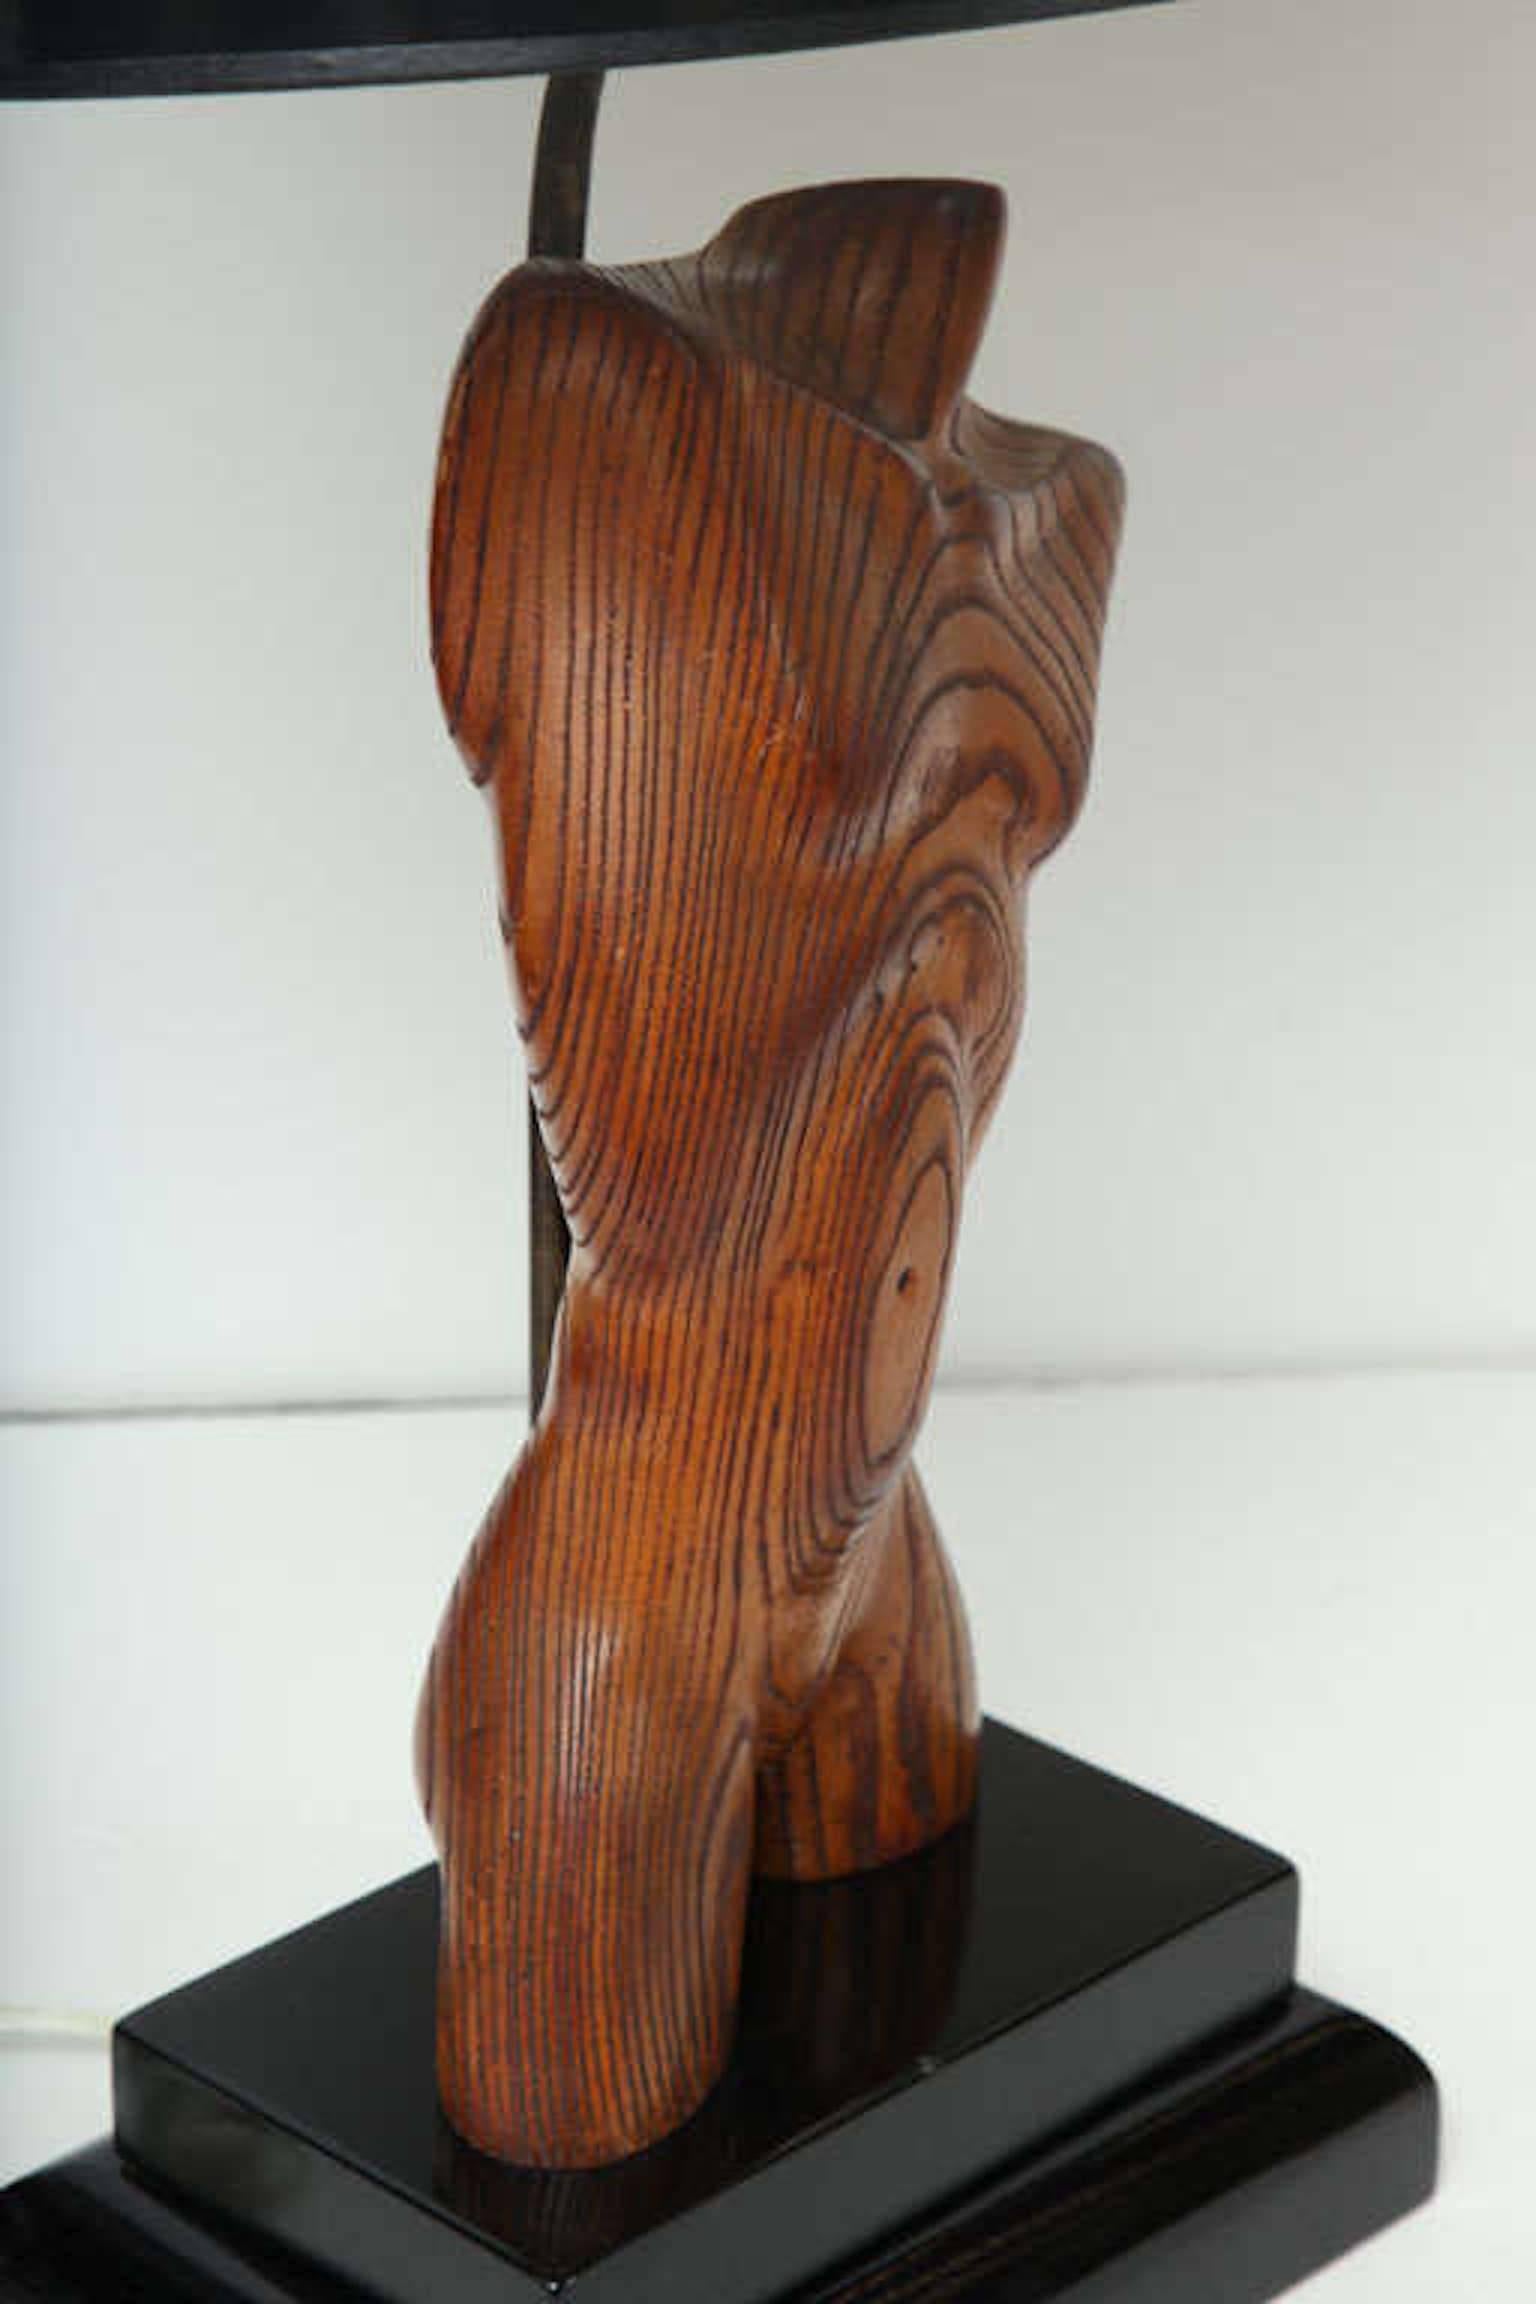 Hand-Carved Table Lamp, Wood, Male Nude, by Keifetz, C 1950